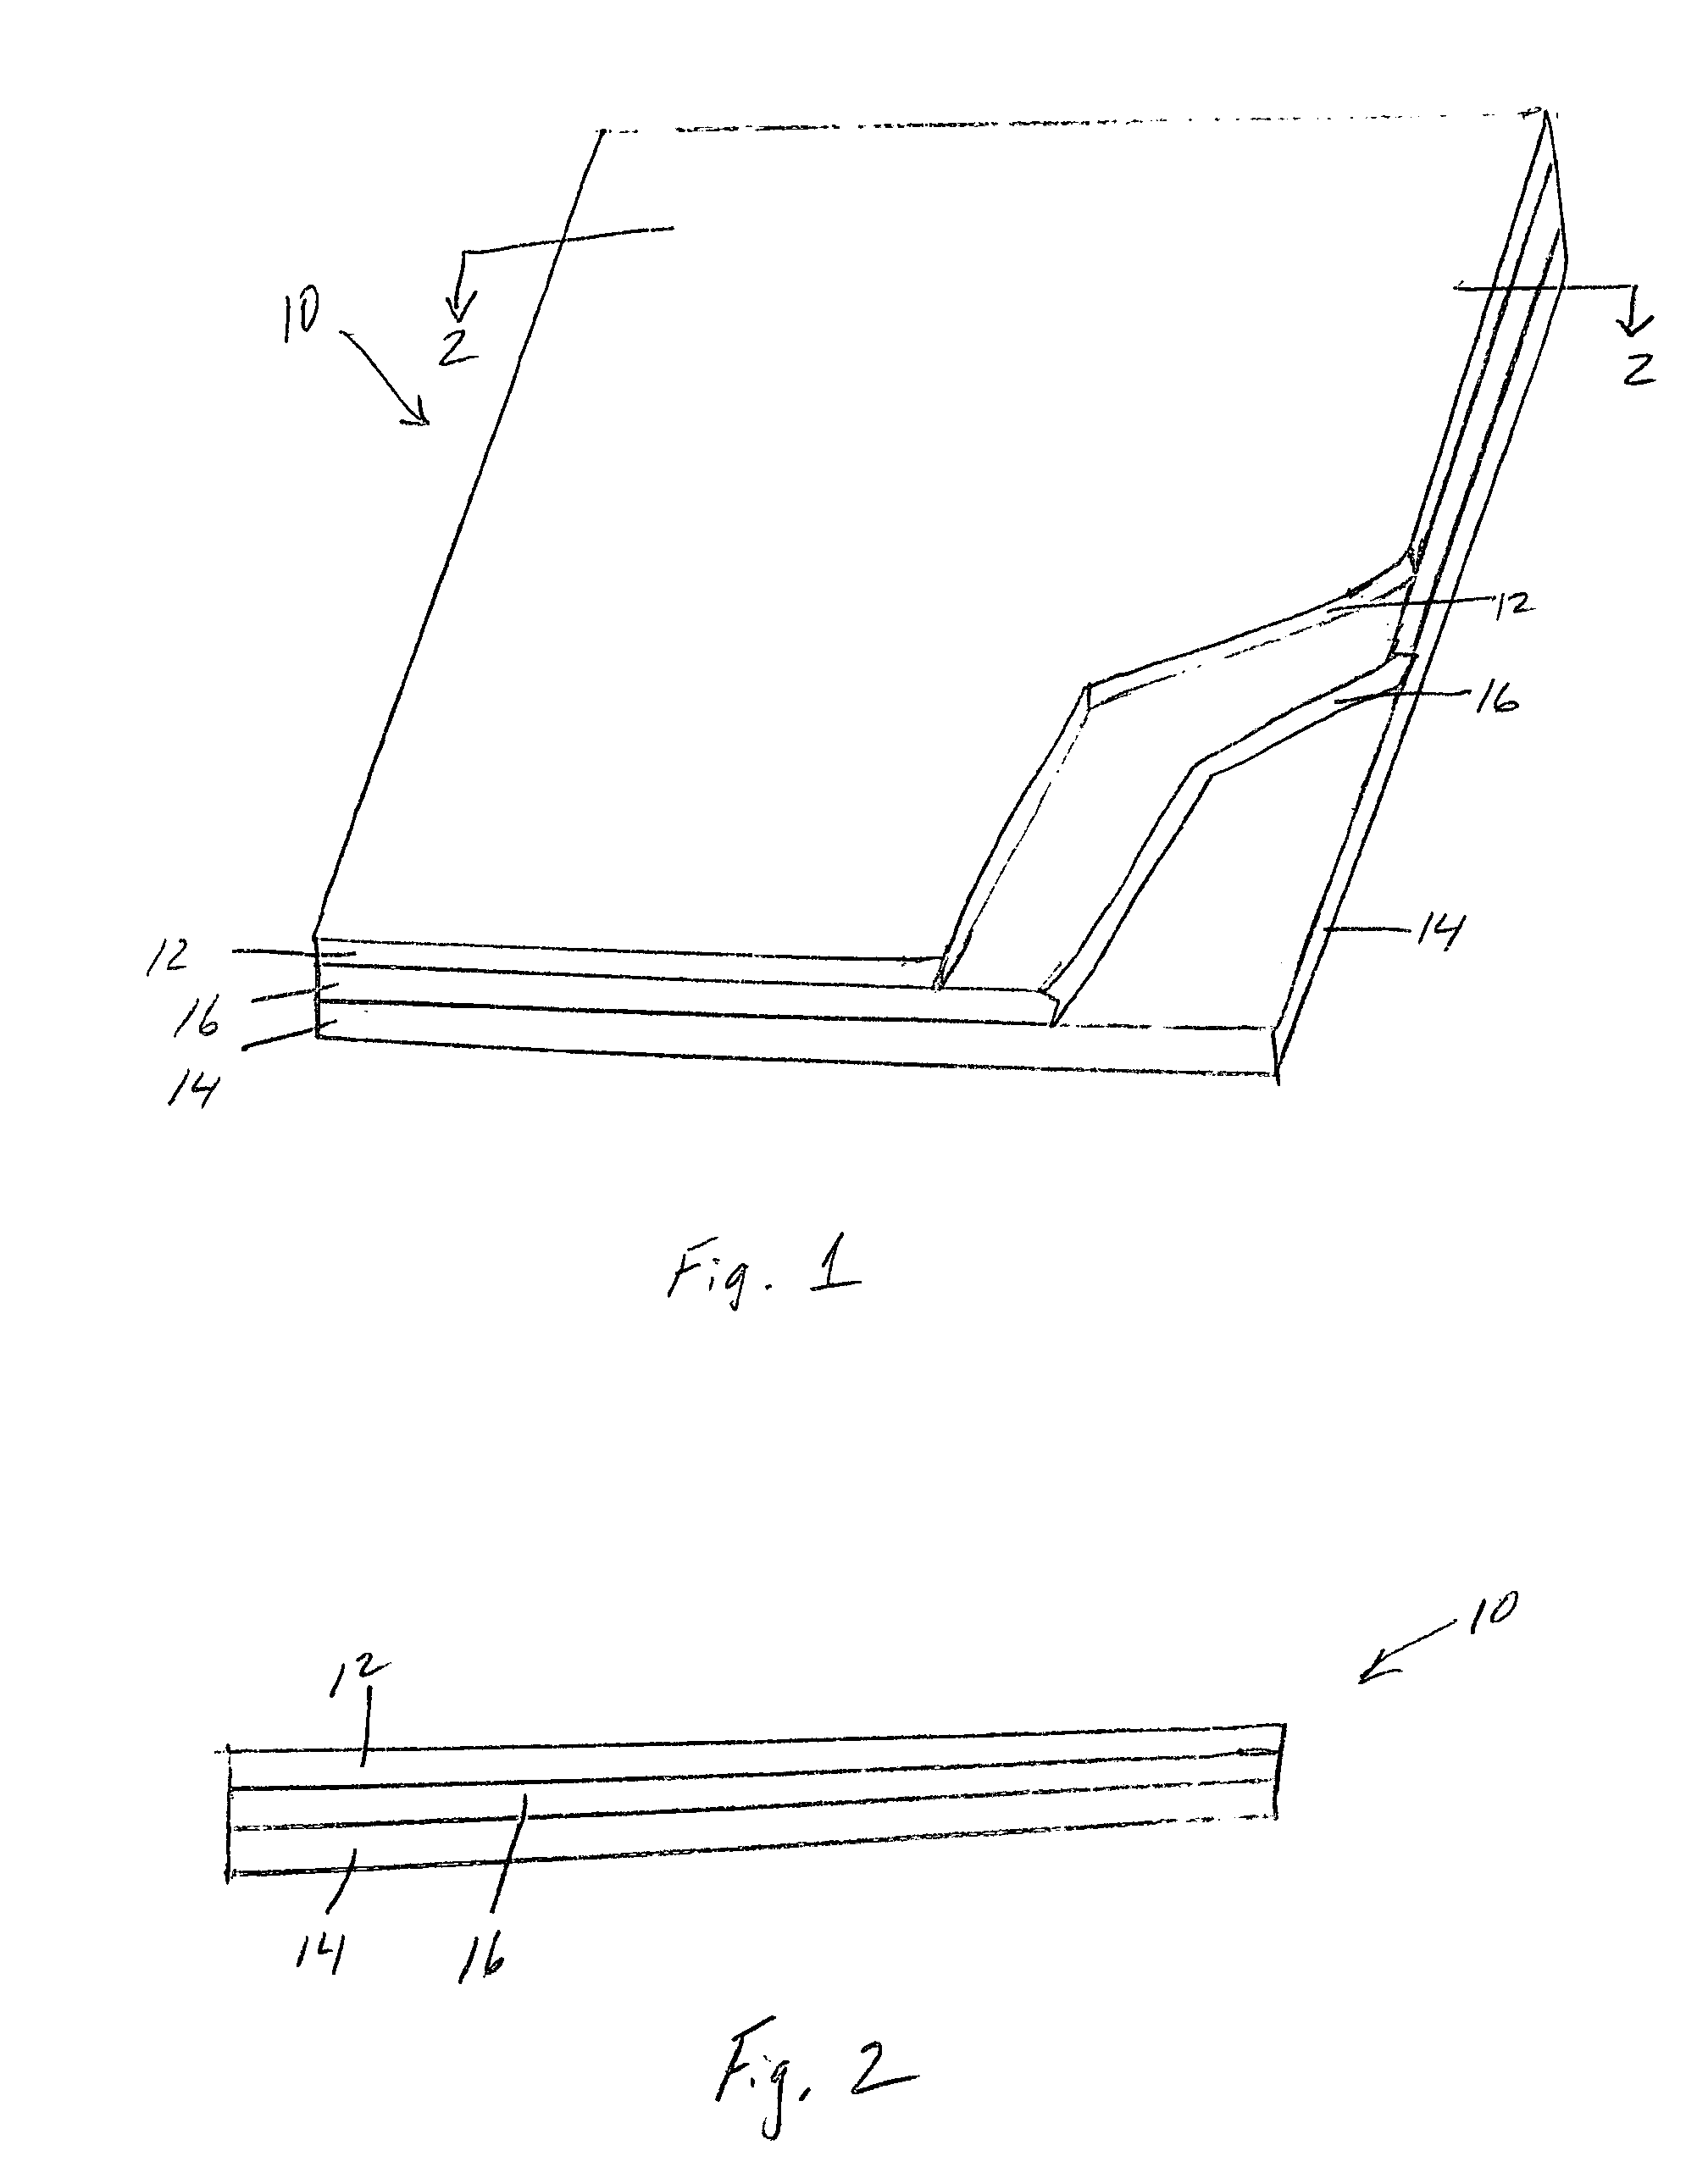 Acacia fiber-containing fibrous structures and methods for making same